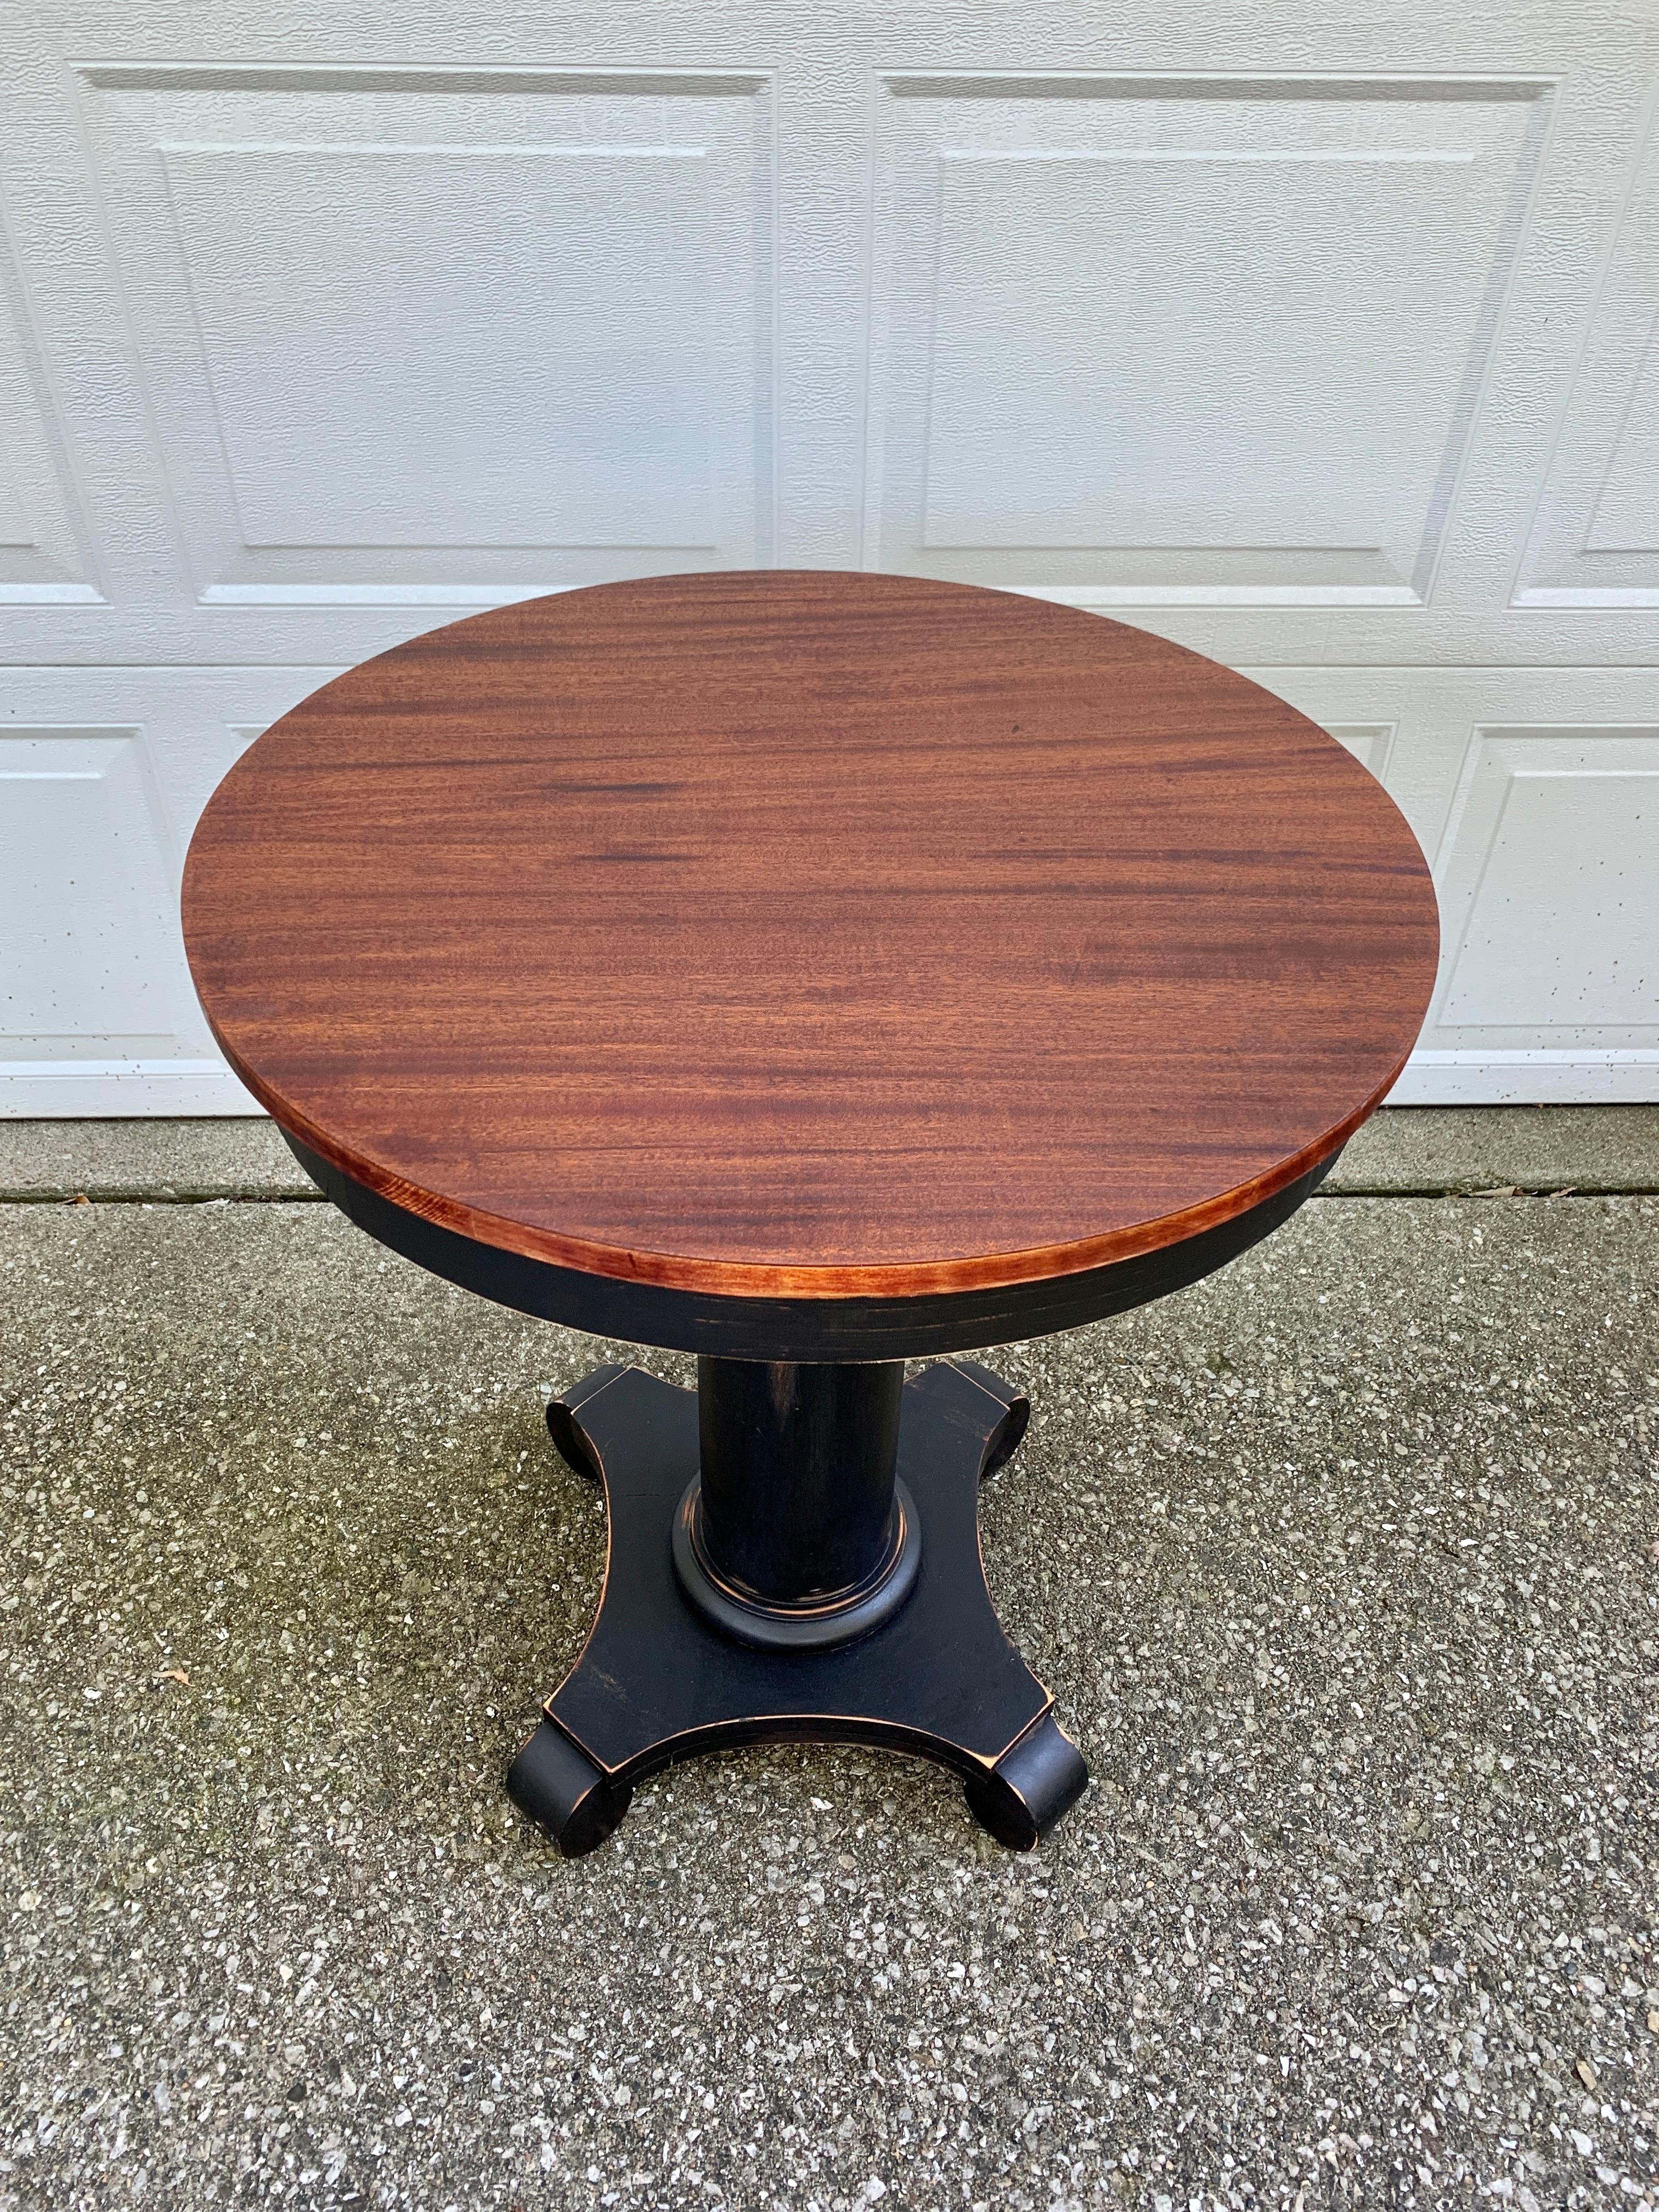 Early 20th Century American Empire Mahogany Pedestal Side Table In Good Condition For Sale In Elkhart, IN